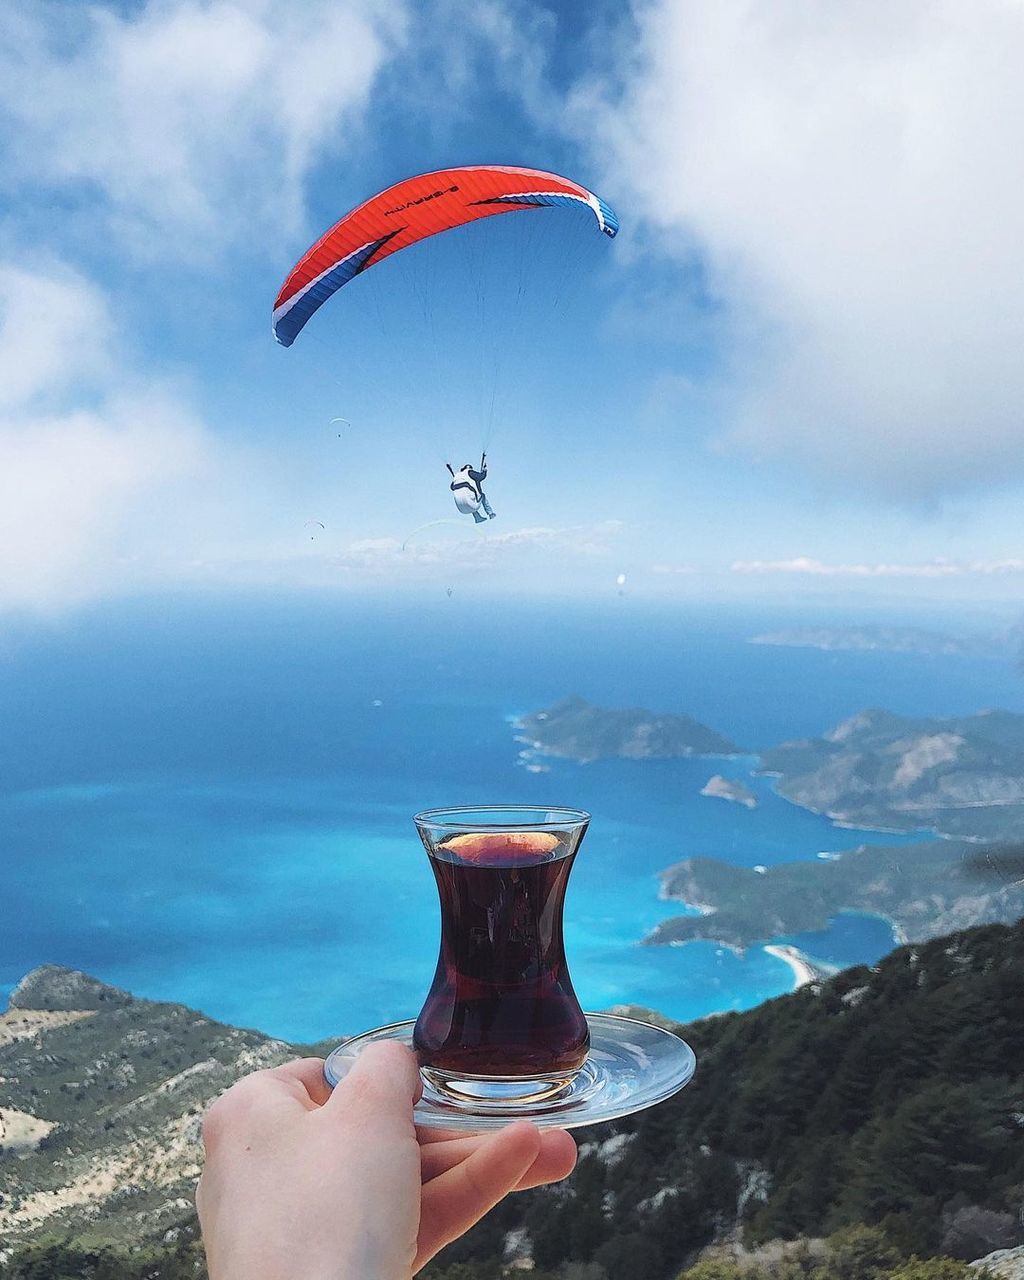 adventure, leisure activity, flying, paragliding, one person, nature, air sports, sports, extreme sports, sky, windsports, mid-air, mountain, cloud, lifestyles, water, environment, holiday, day, vacation, parachute, trip, scenics - nature, landscape, joy, beauty in nature, parachuting, transportation, motion, exhilaration, activity, outdoors, mountain range, land, holding, adult, gliding, sea, travel destinations, risk, recreation, outdoor pursuit, hand, fun, travel, air vehicle